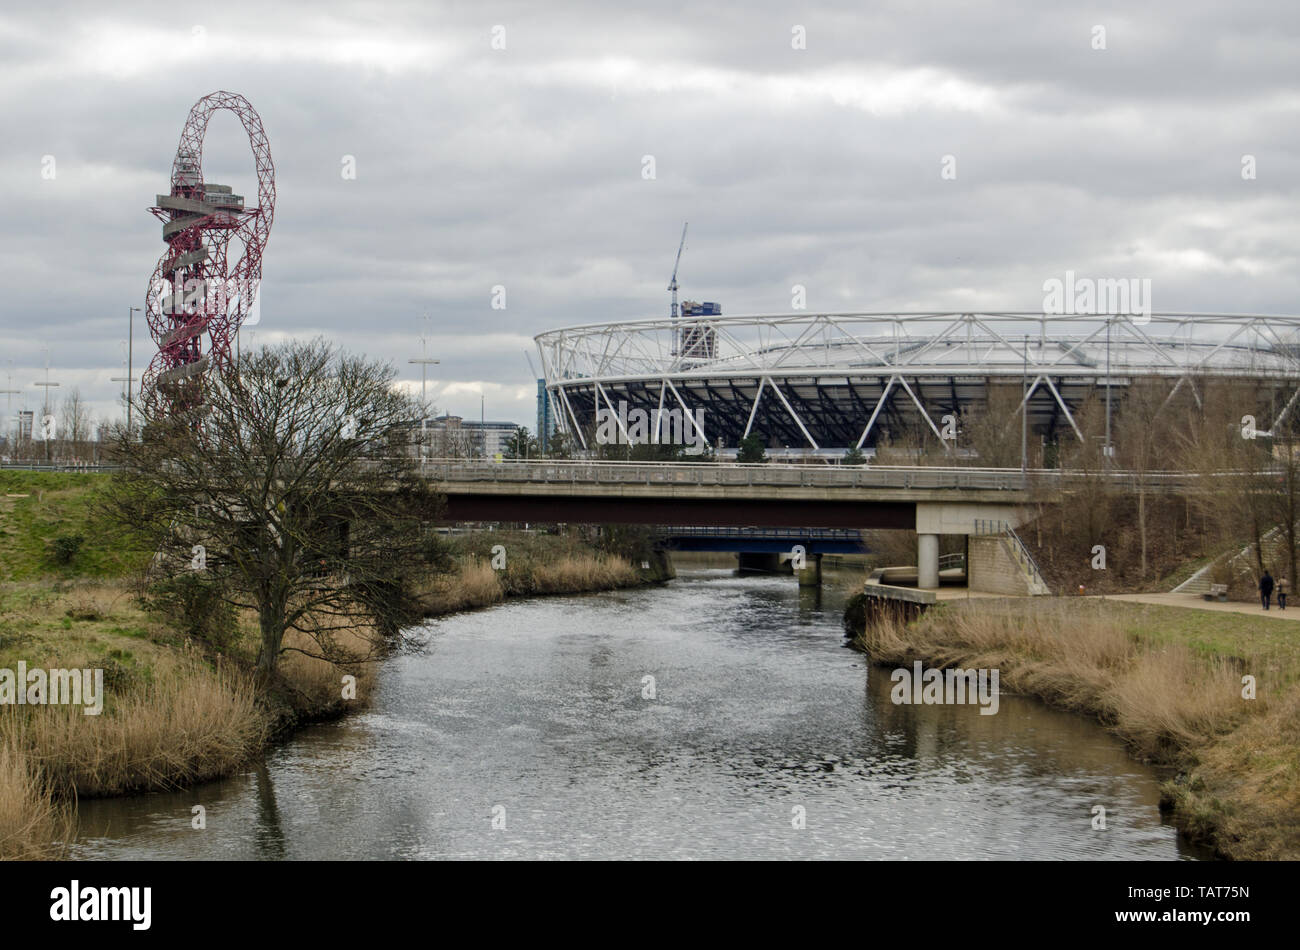 LONDON, UK - MARCH 19, 2016:  View along the River Lea towards the London Stadium and Orbit structure in Queen Elizabeth Olympic Park, Stratford. Stock Photo